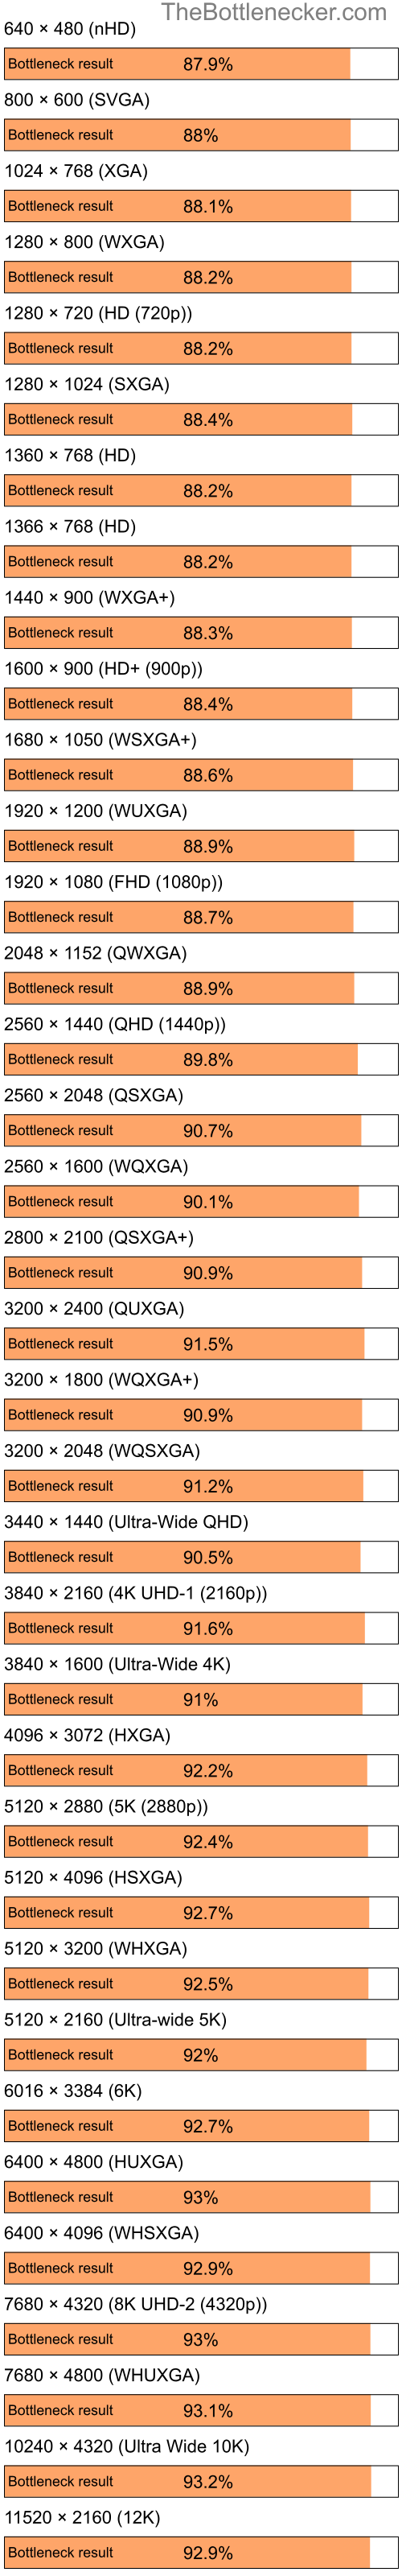 Bottleneck results by resolution for Intel Pentium 4 and NVIDIA GeForce4 Ti 4200 in General Tasks